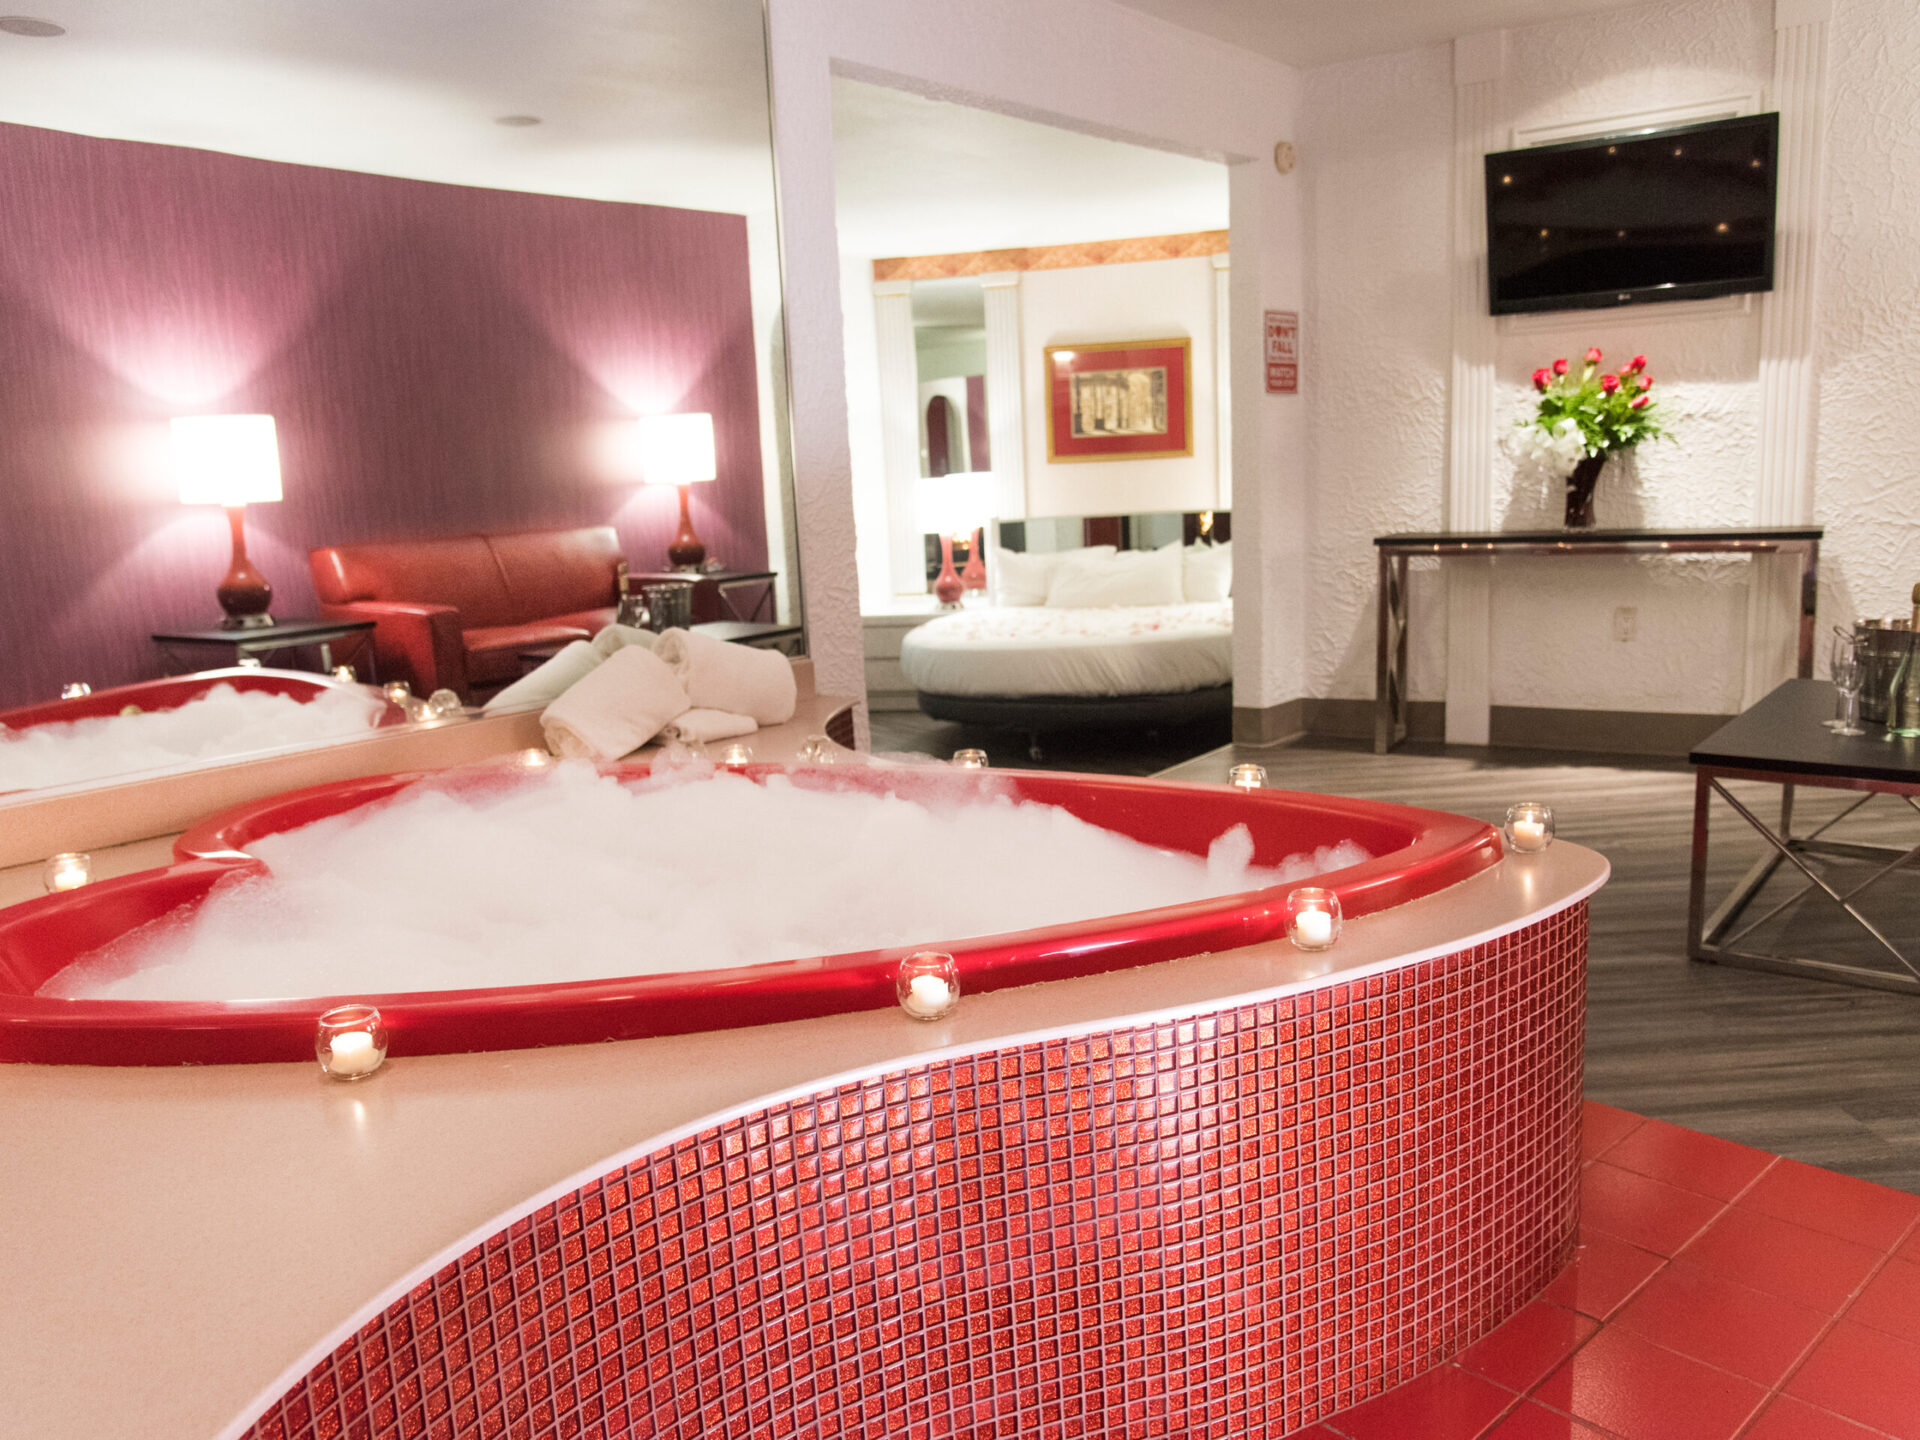 A hotel room with a red heart shaped tub surrounded by candles.